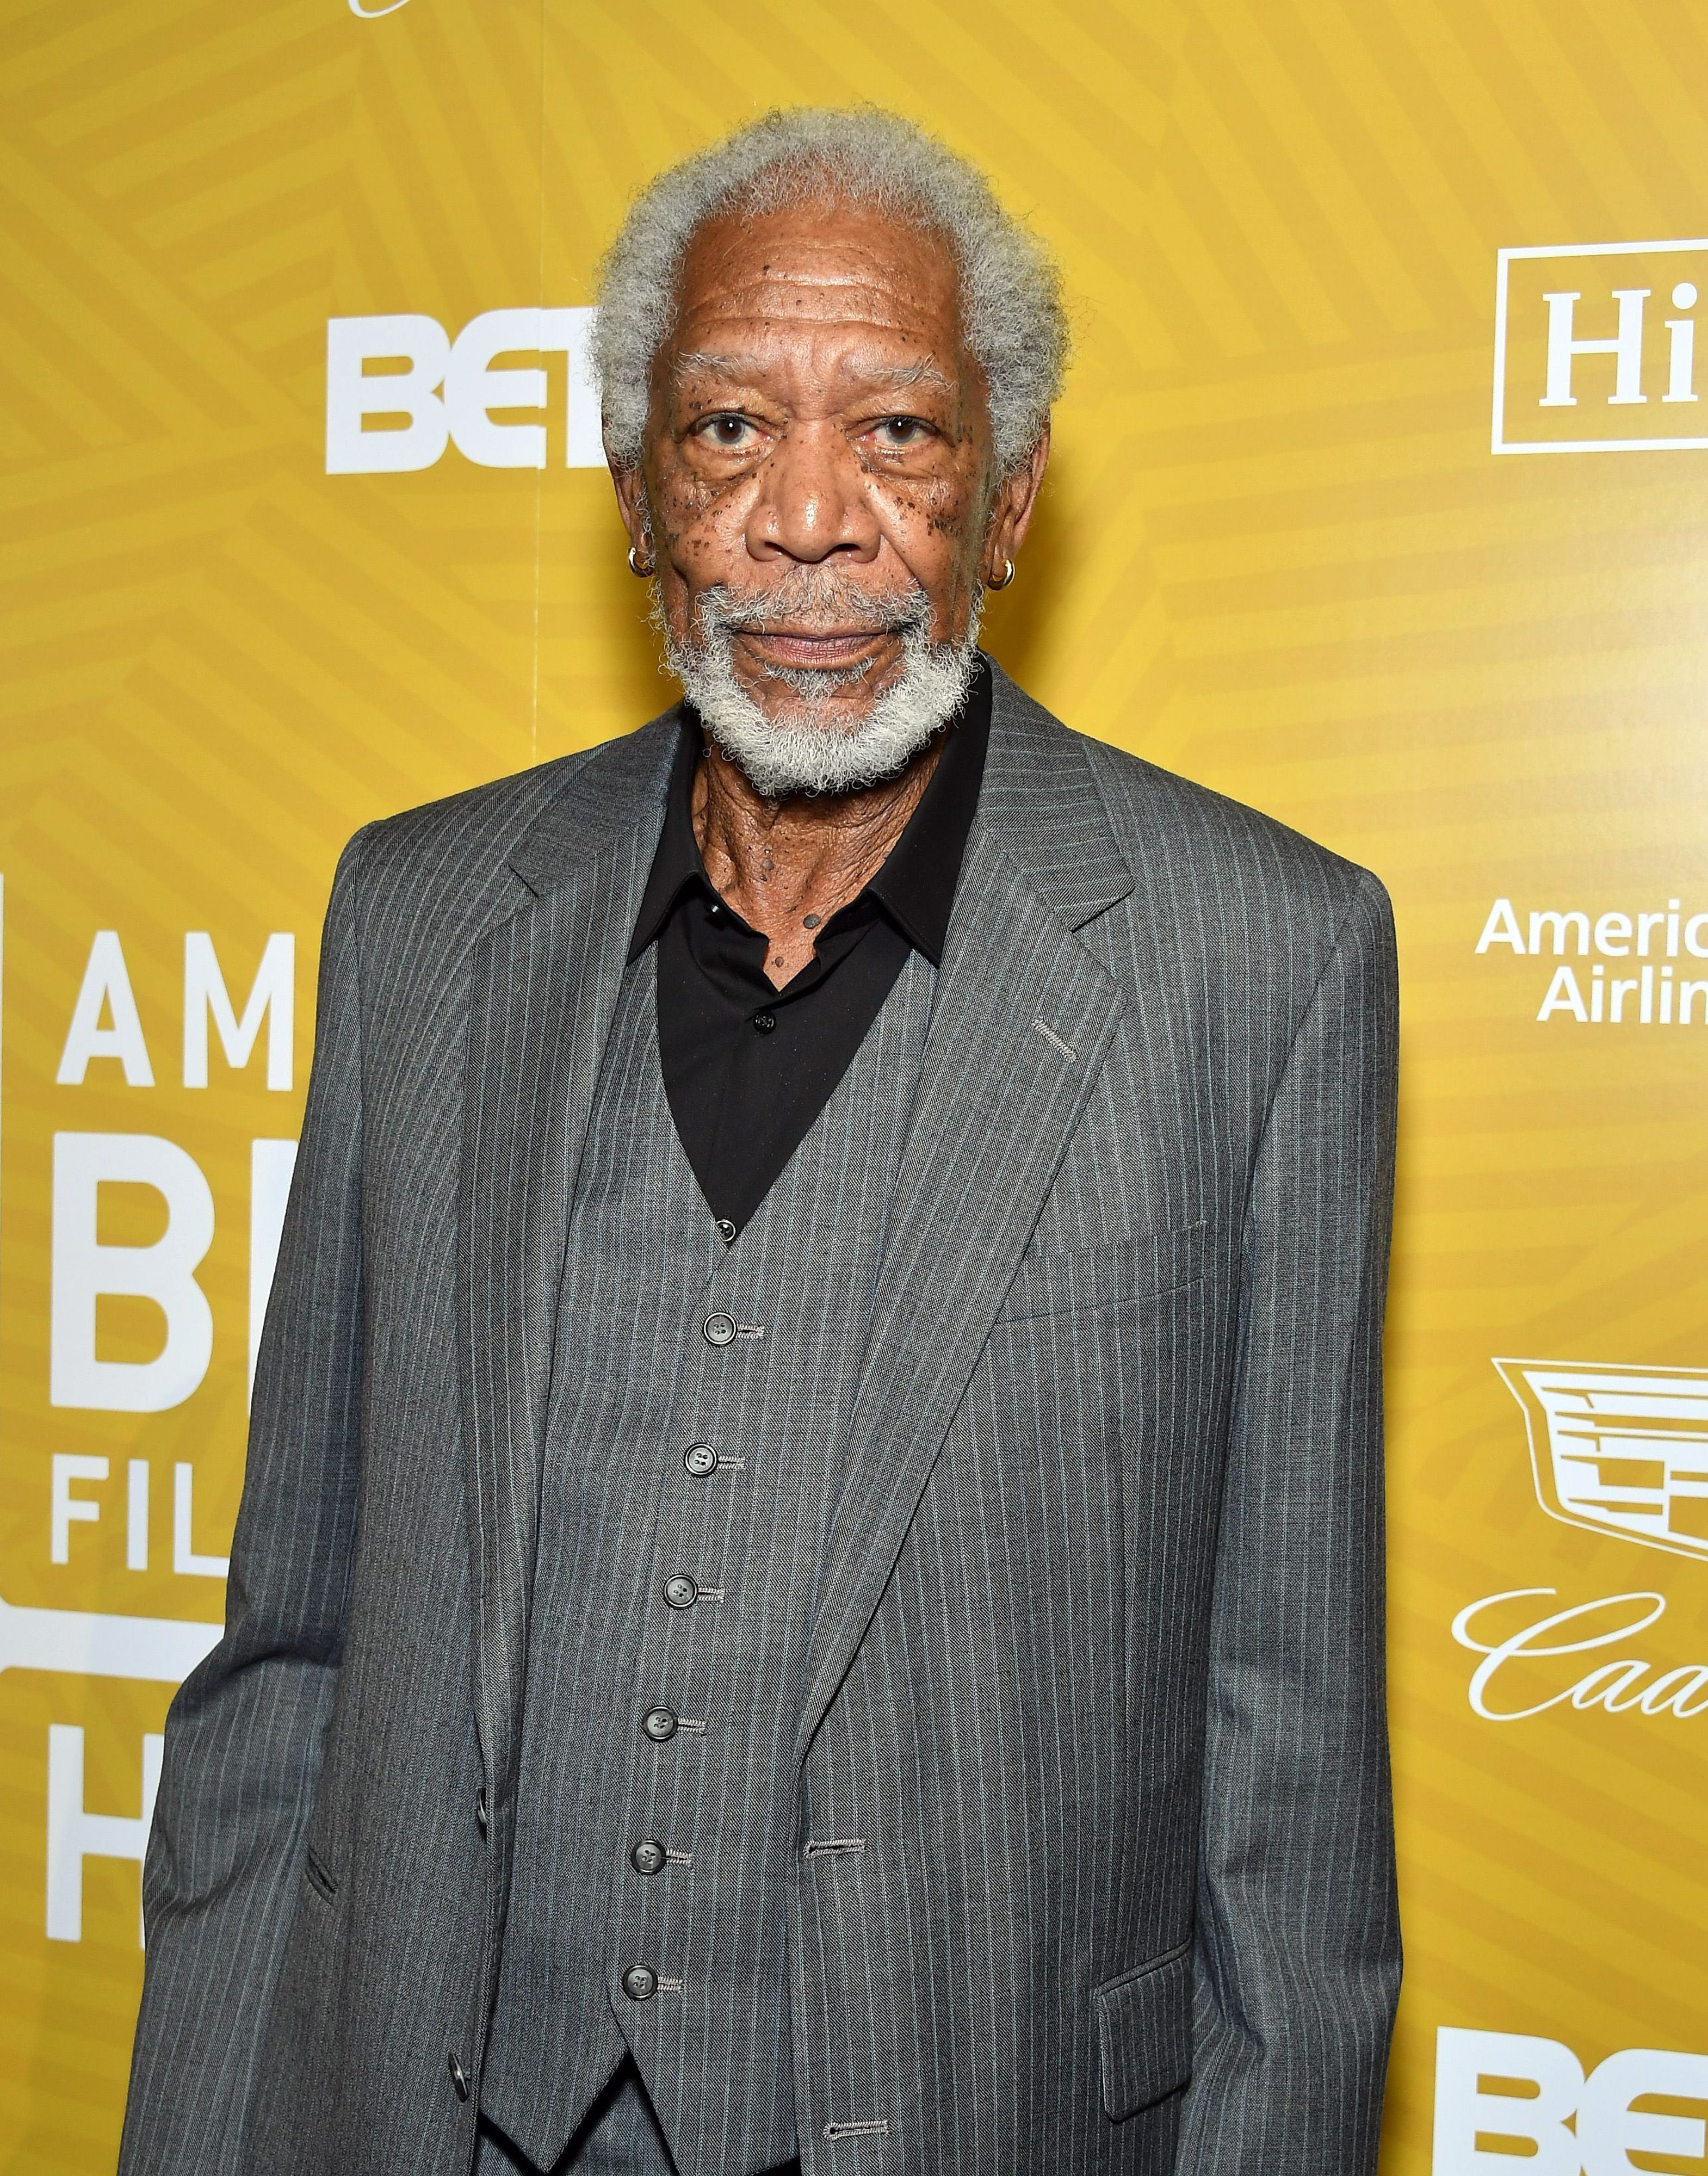 Amazon Announces Solos Starring Anne Hathaway And Morgan Freeman